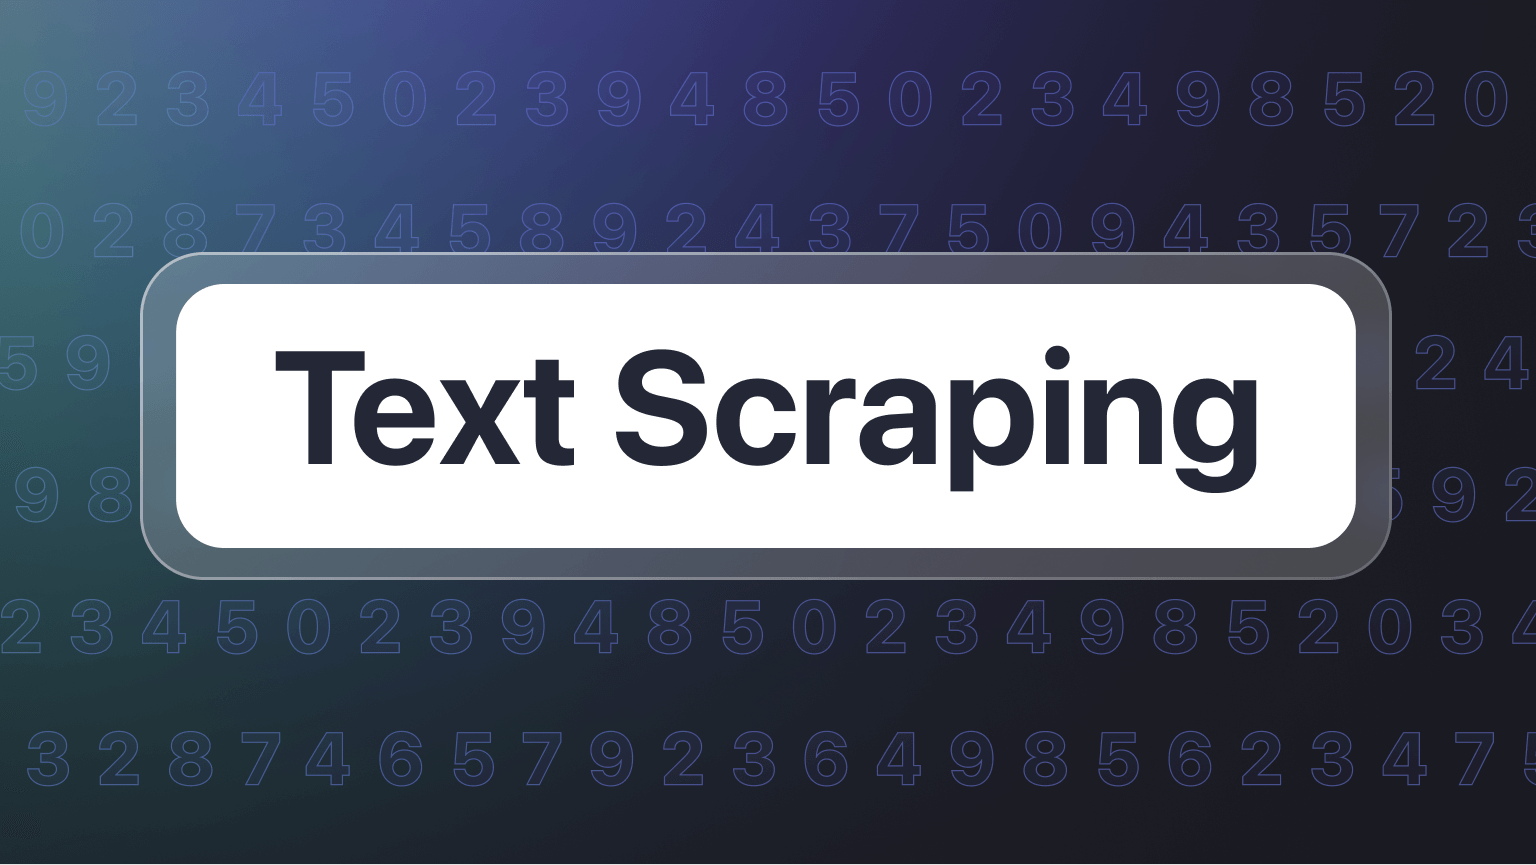 Text scraping